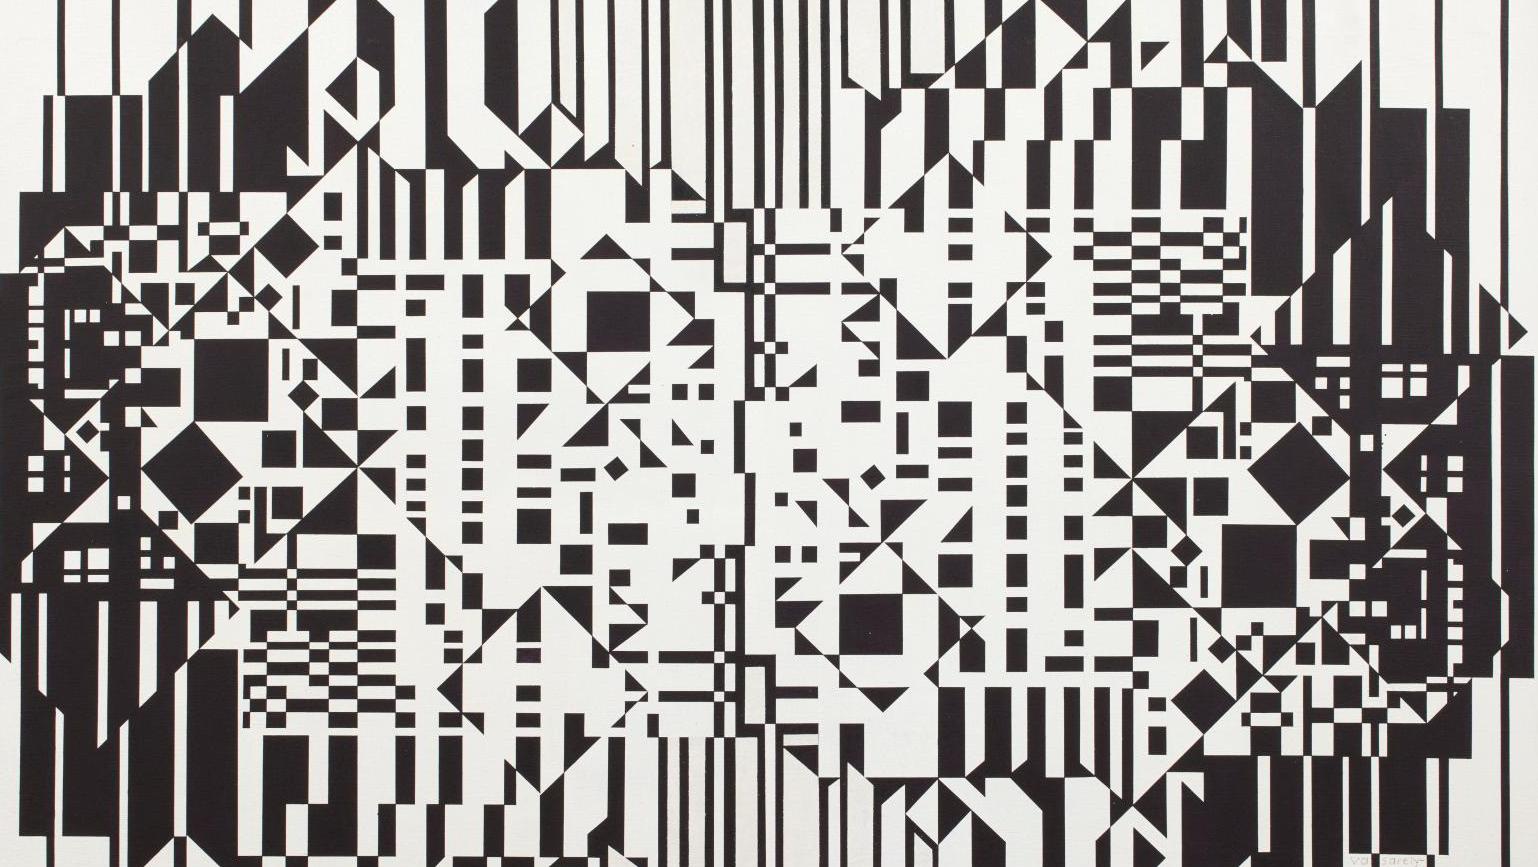 Victor Vasarely (1906-1997), Bi-Syrom, 1956/76, acrylic on canvas, 71 x 108 cm/27.95... The Journey of a Contemporary Collection from Abstract to Figurative Art